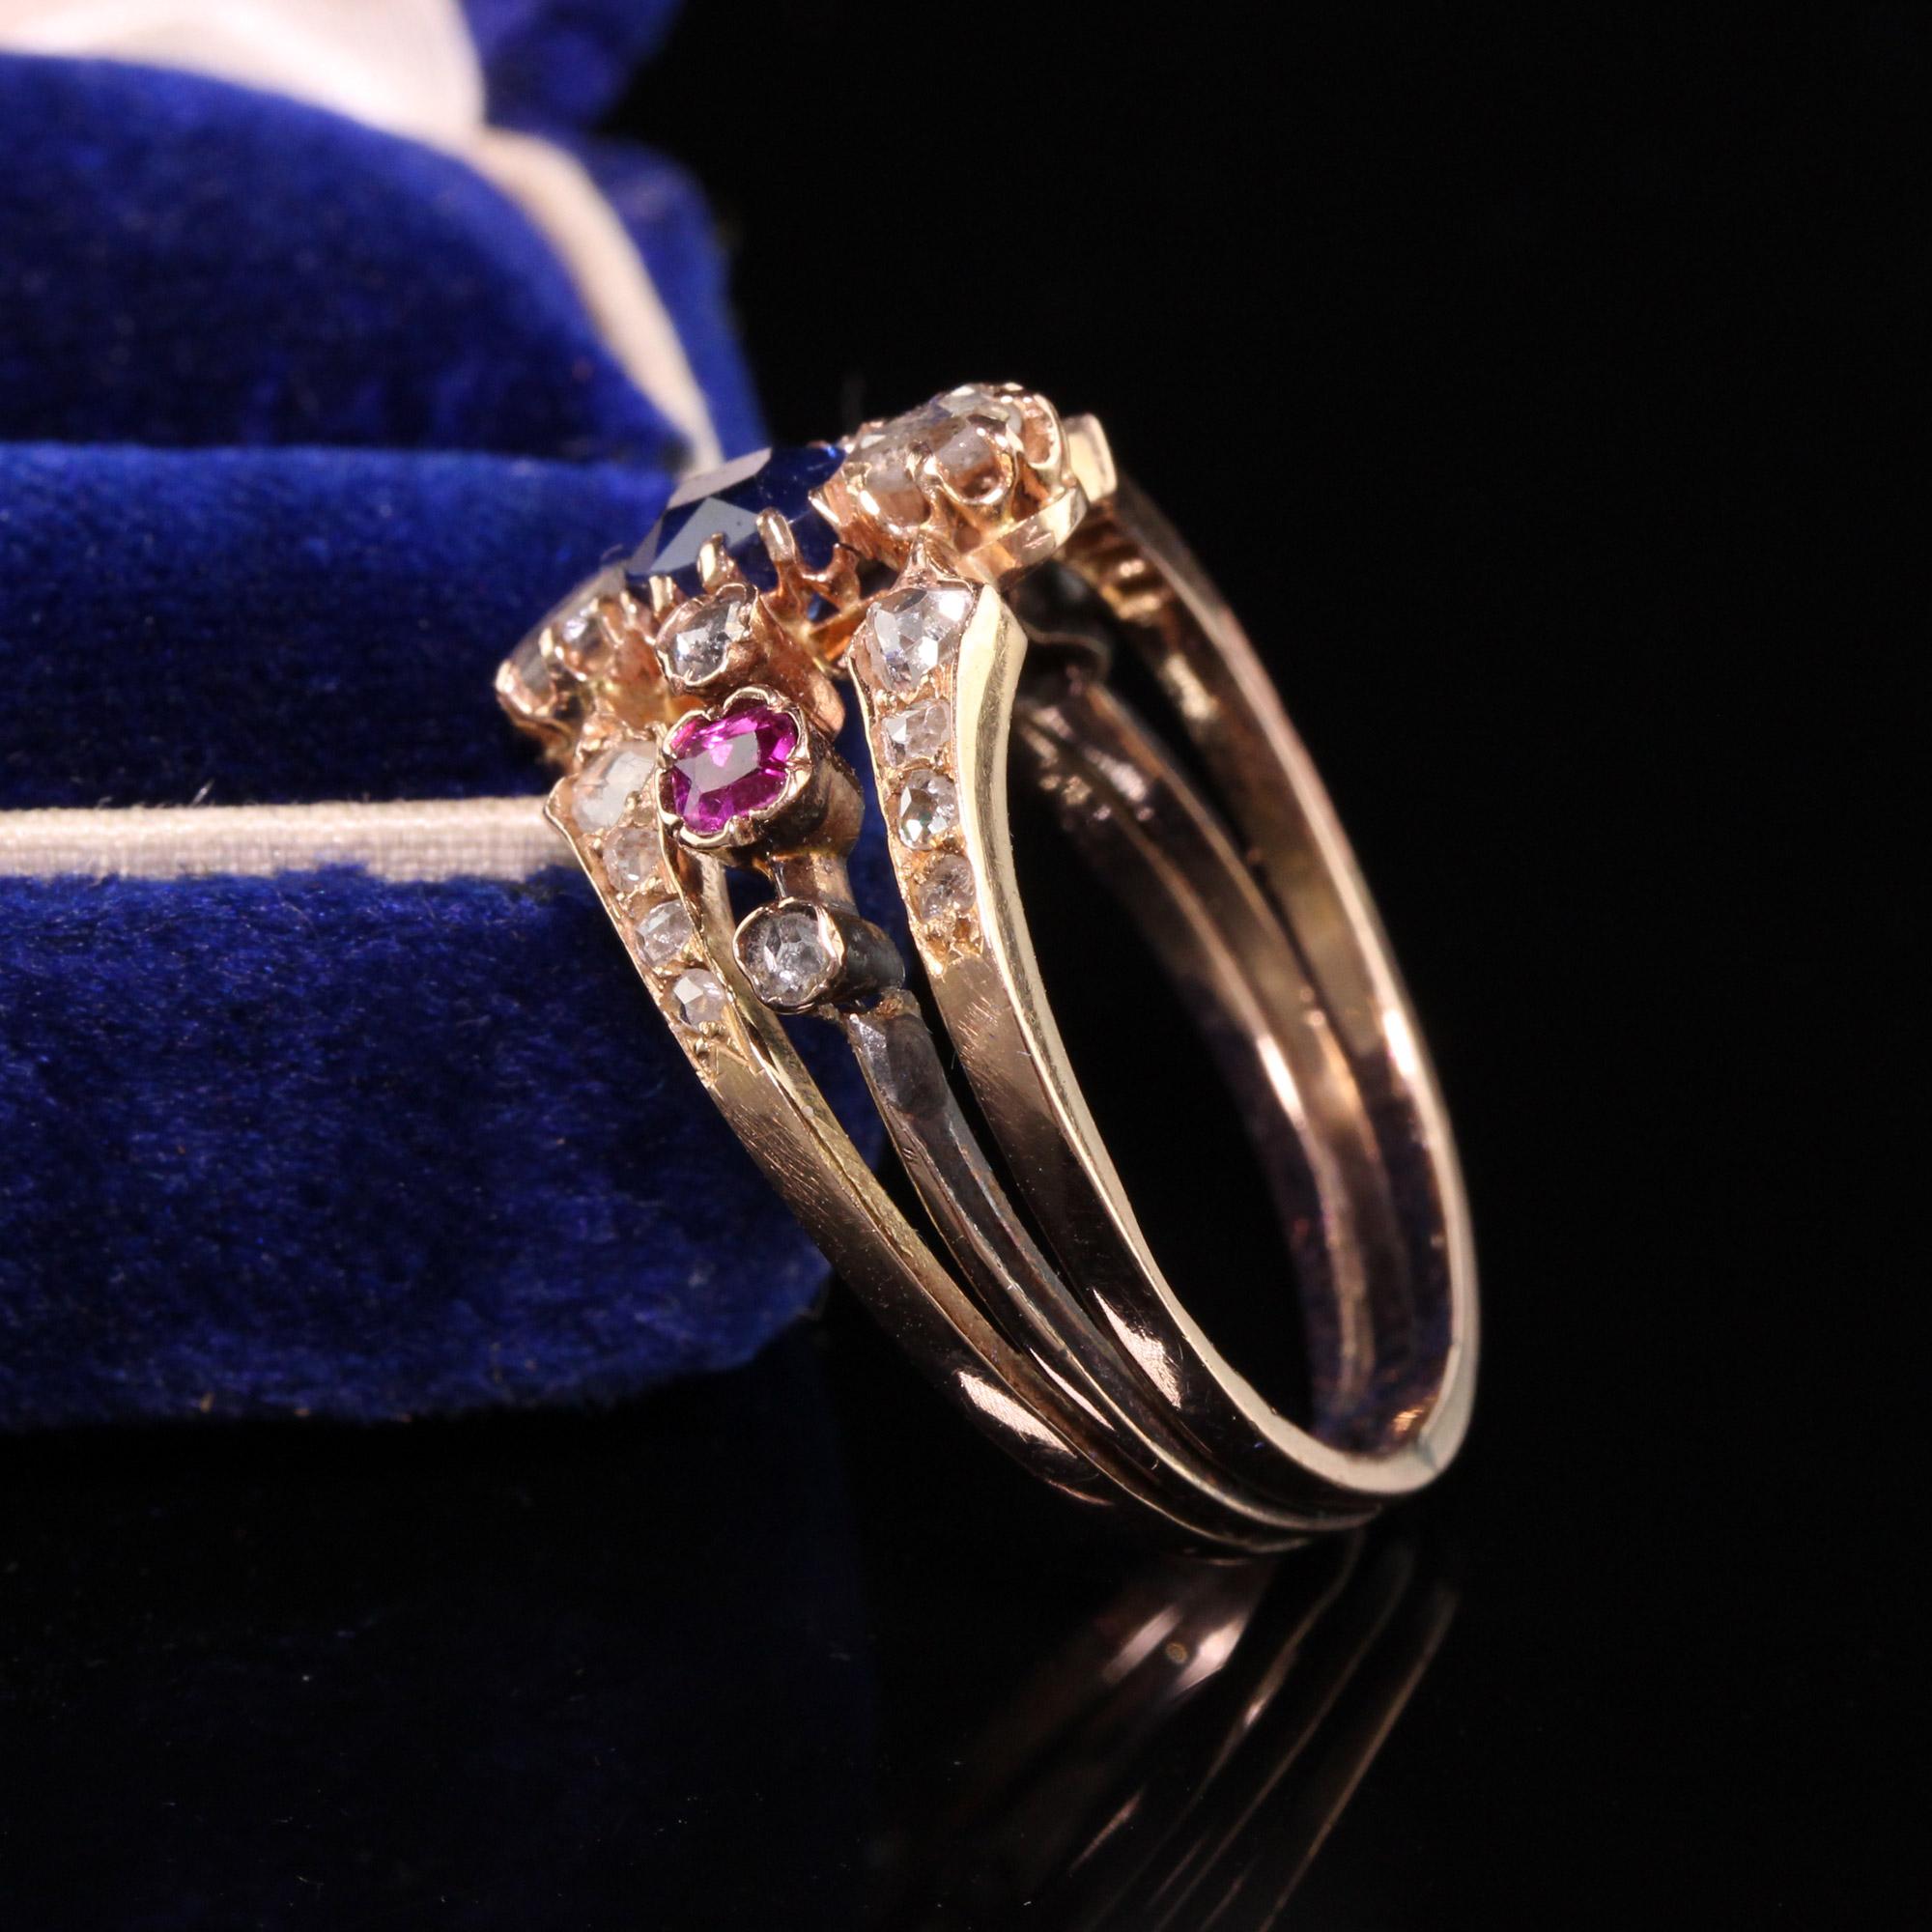 Beautiful Antique Victorian 18K Rose Gold Rose Cut Diamond Sapphire and Ruby Ring. This gorgeous ring has rose cut diamonds set in rose gold with two ruby accents and a center old cushion cut sapphire.

Item #R0775

Metal: 18K Rose Gold

Diamond: